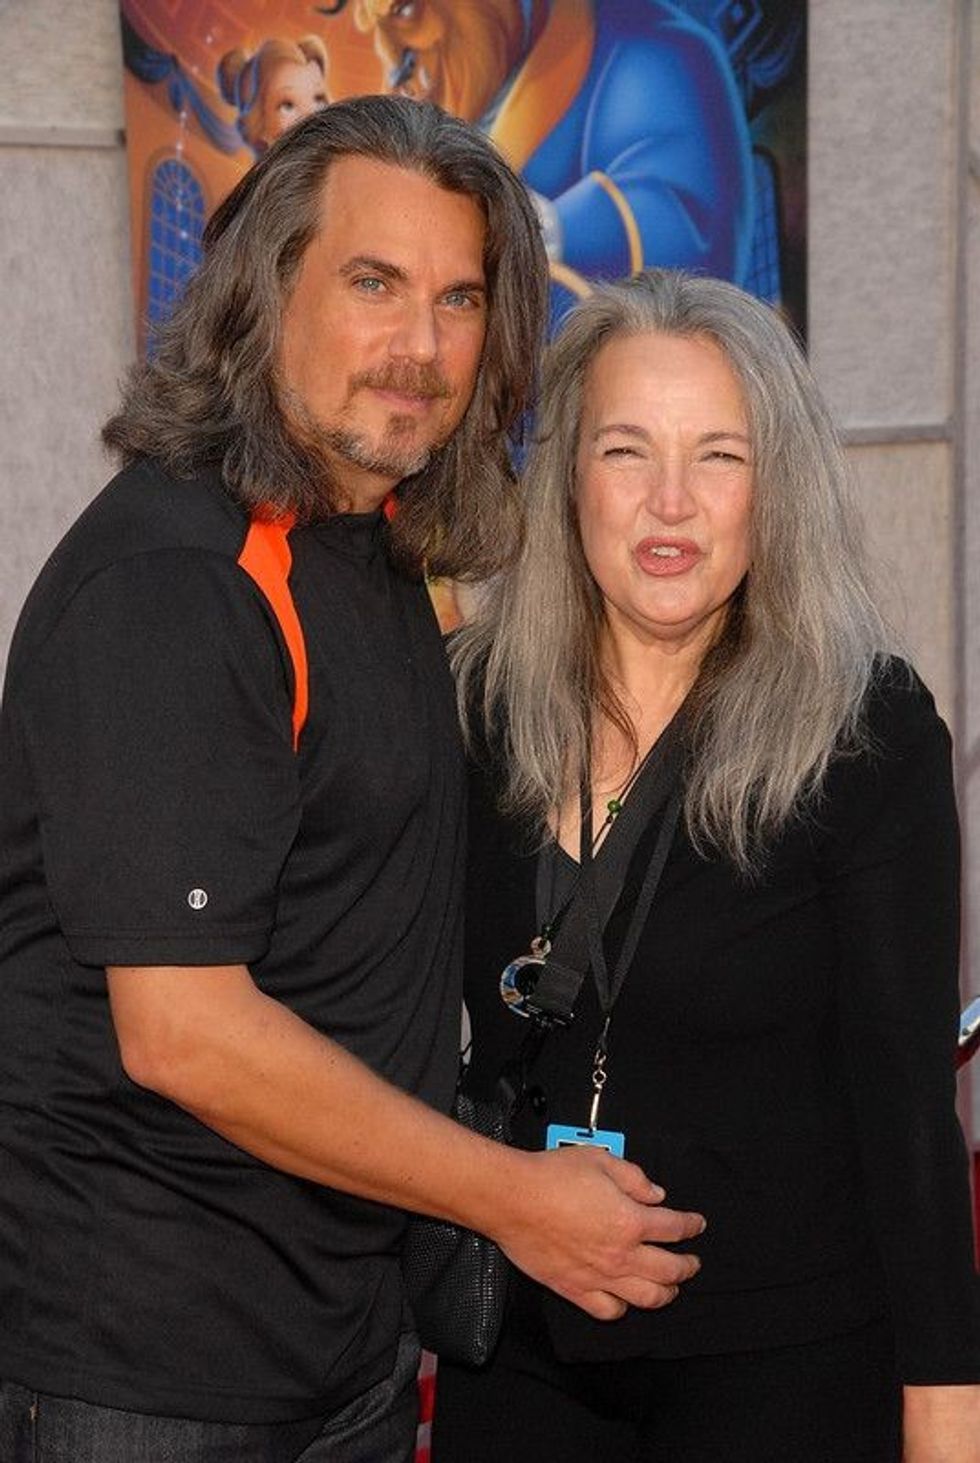 Robby Benson and Karla DeVito attend the 'Beauty And The Beast' Sing-A-Long DVD Premiere at El Capitan in Hollywood, California.